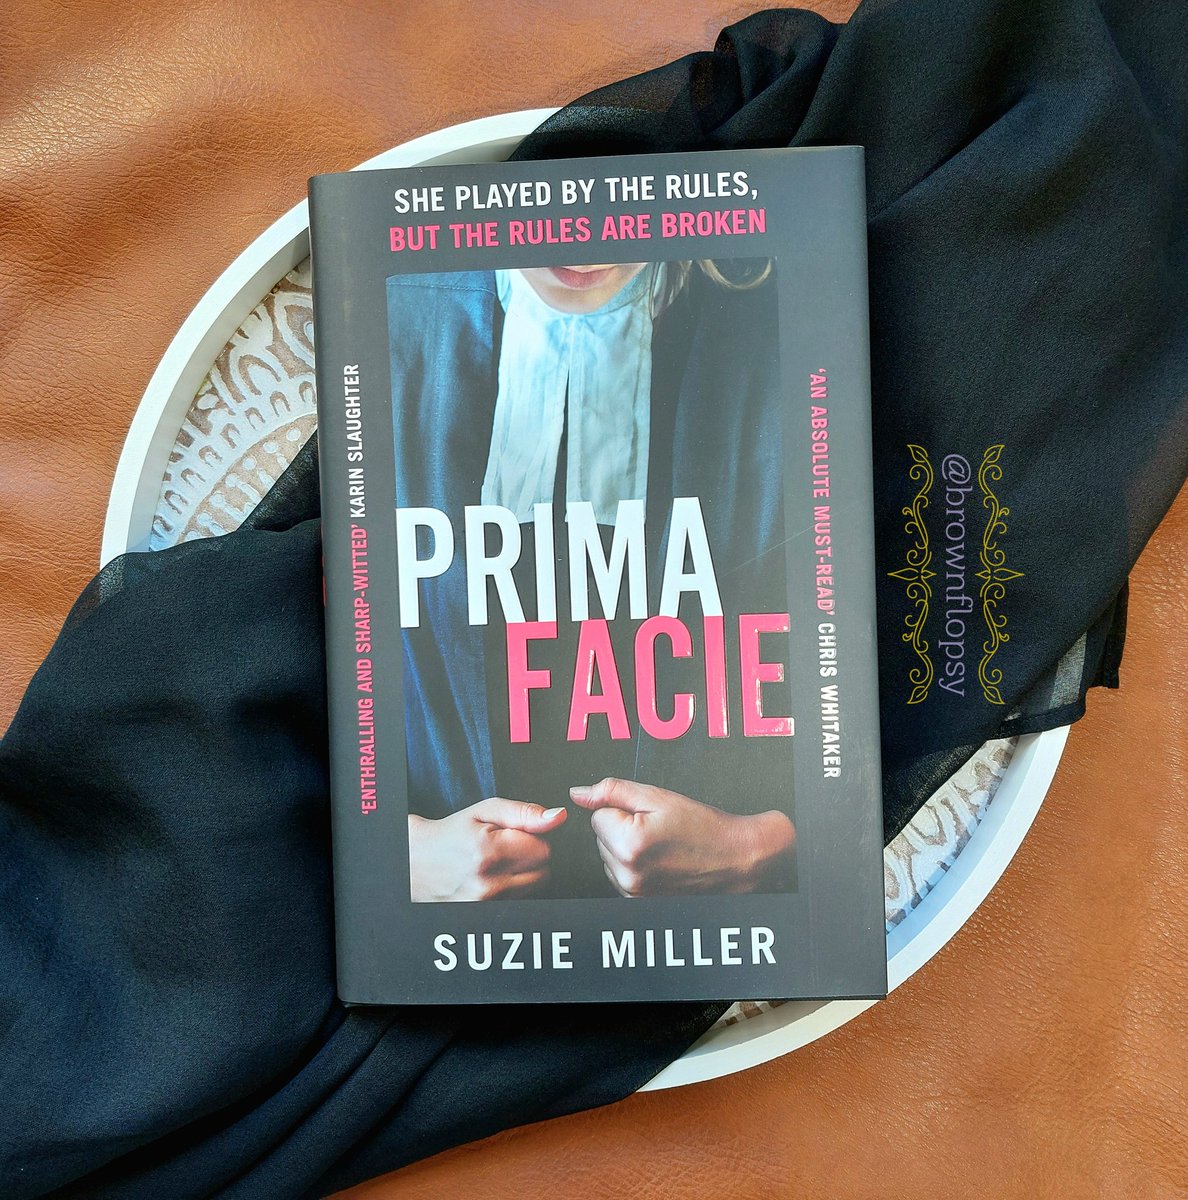 Welcome to my review of the incredibly powerful #PrimaFacie by @SuzieMillerWrtr - based on her award-winning stage play. ⚖ Out now from @HutchHeinemann this is a must read! What an outstanding @Squadpod3 #SquadPodFeaturedBook March selection! brownflopsy.blogspot.com/2024/04/prima-…